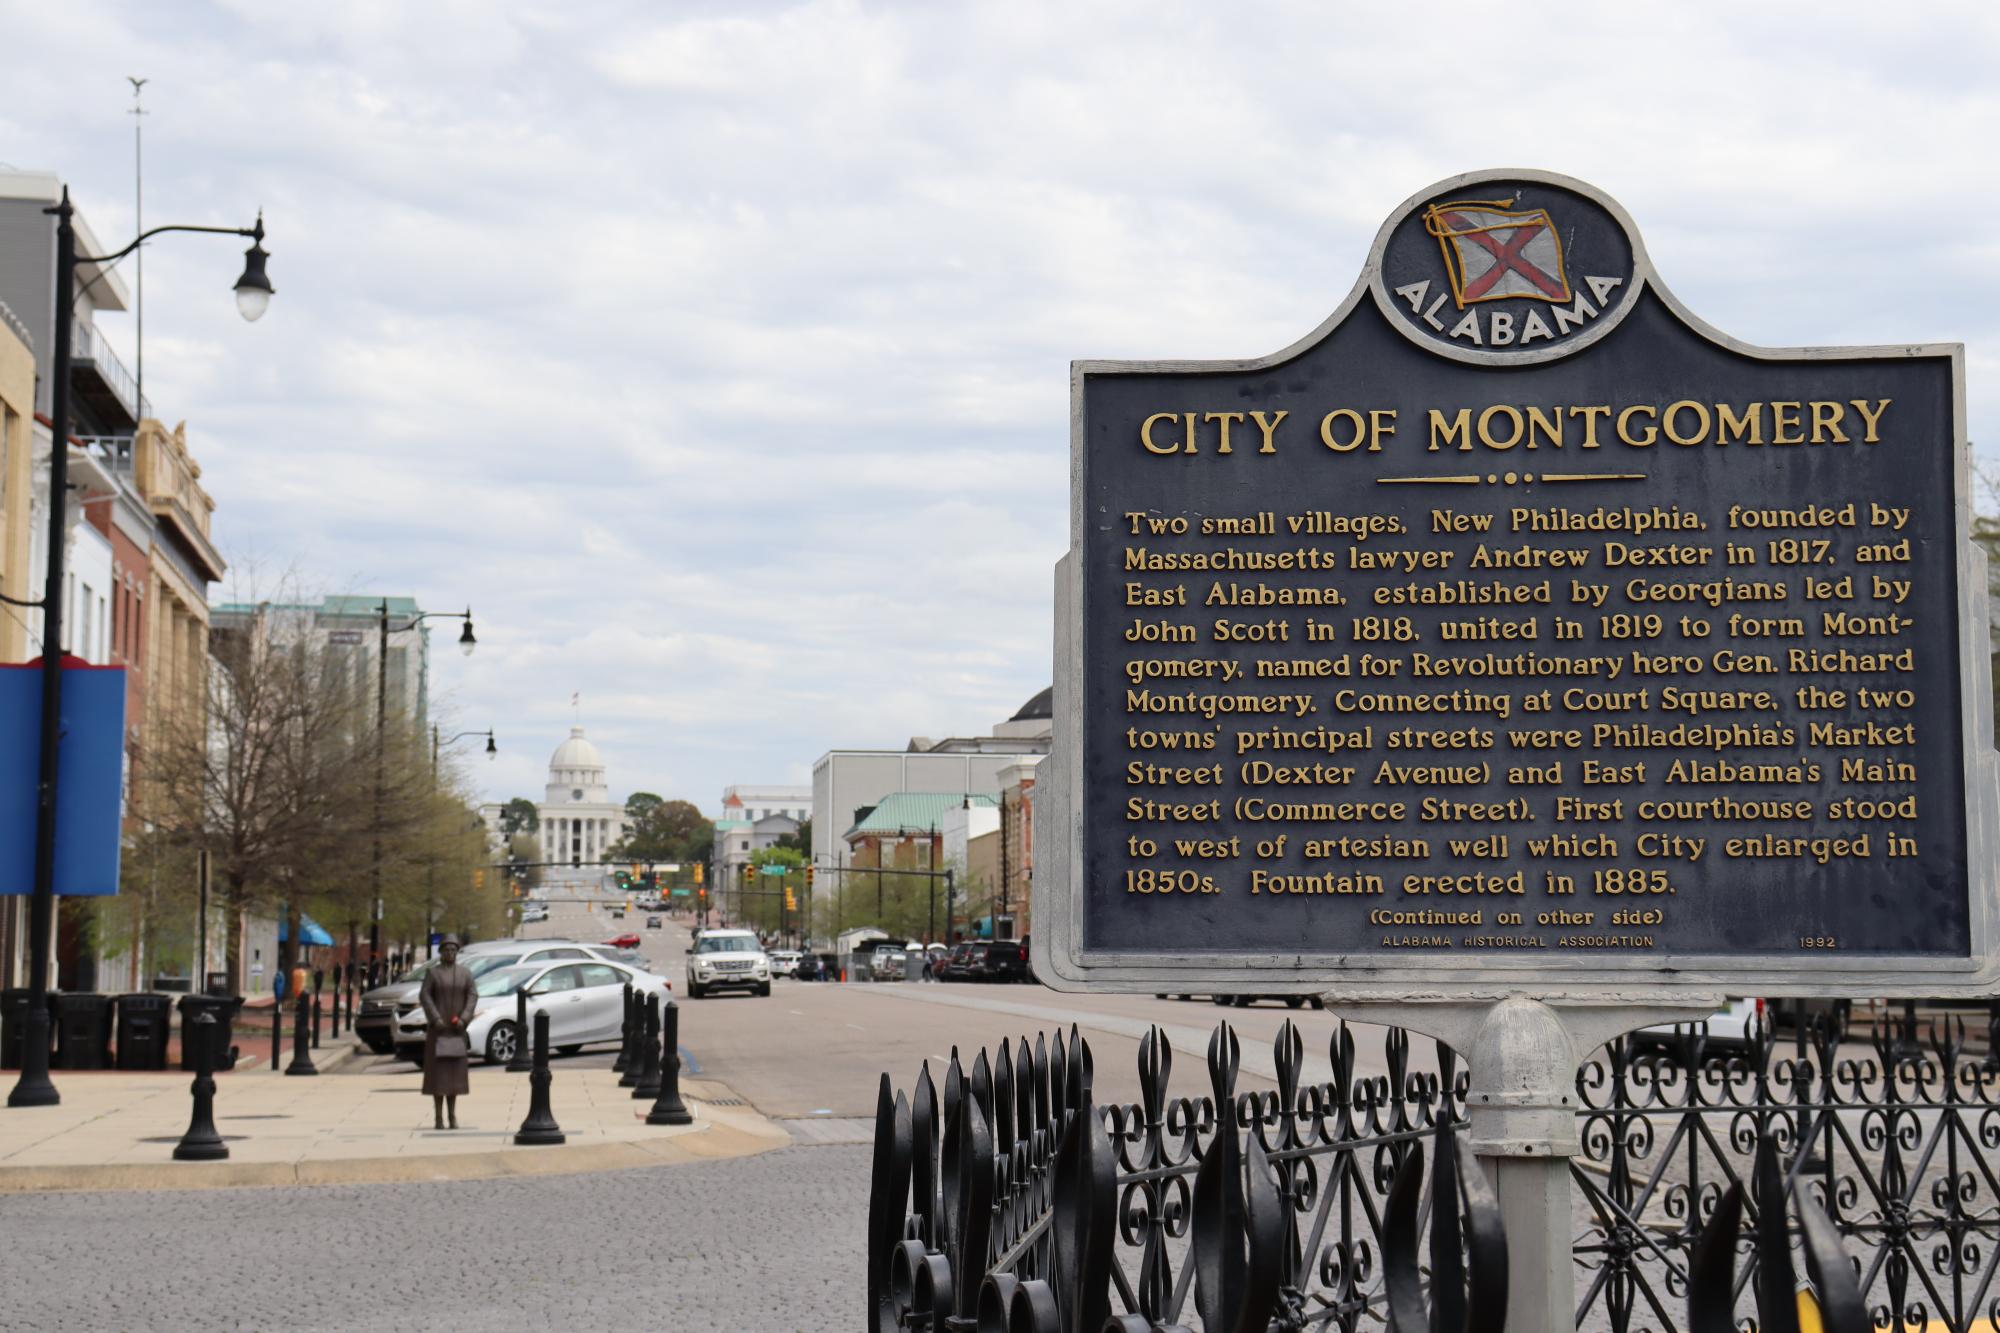 plaque for Montgomery, Alabama in the foreground, Alabama capitol building in the background